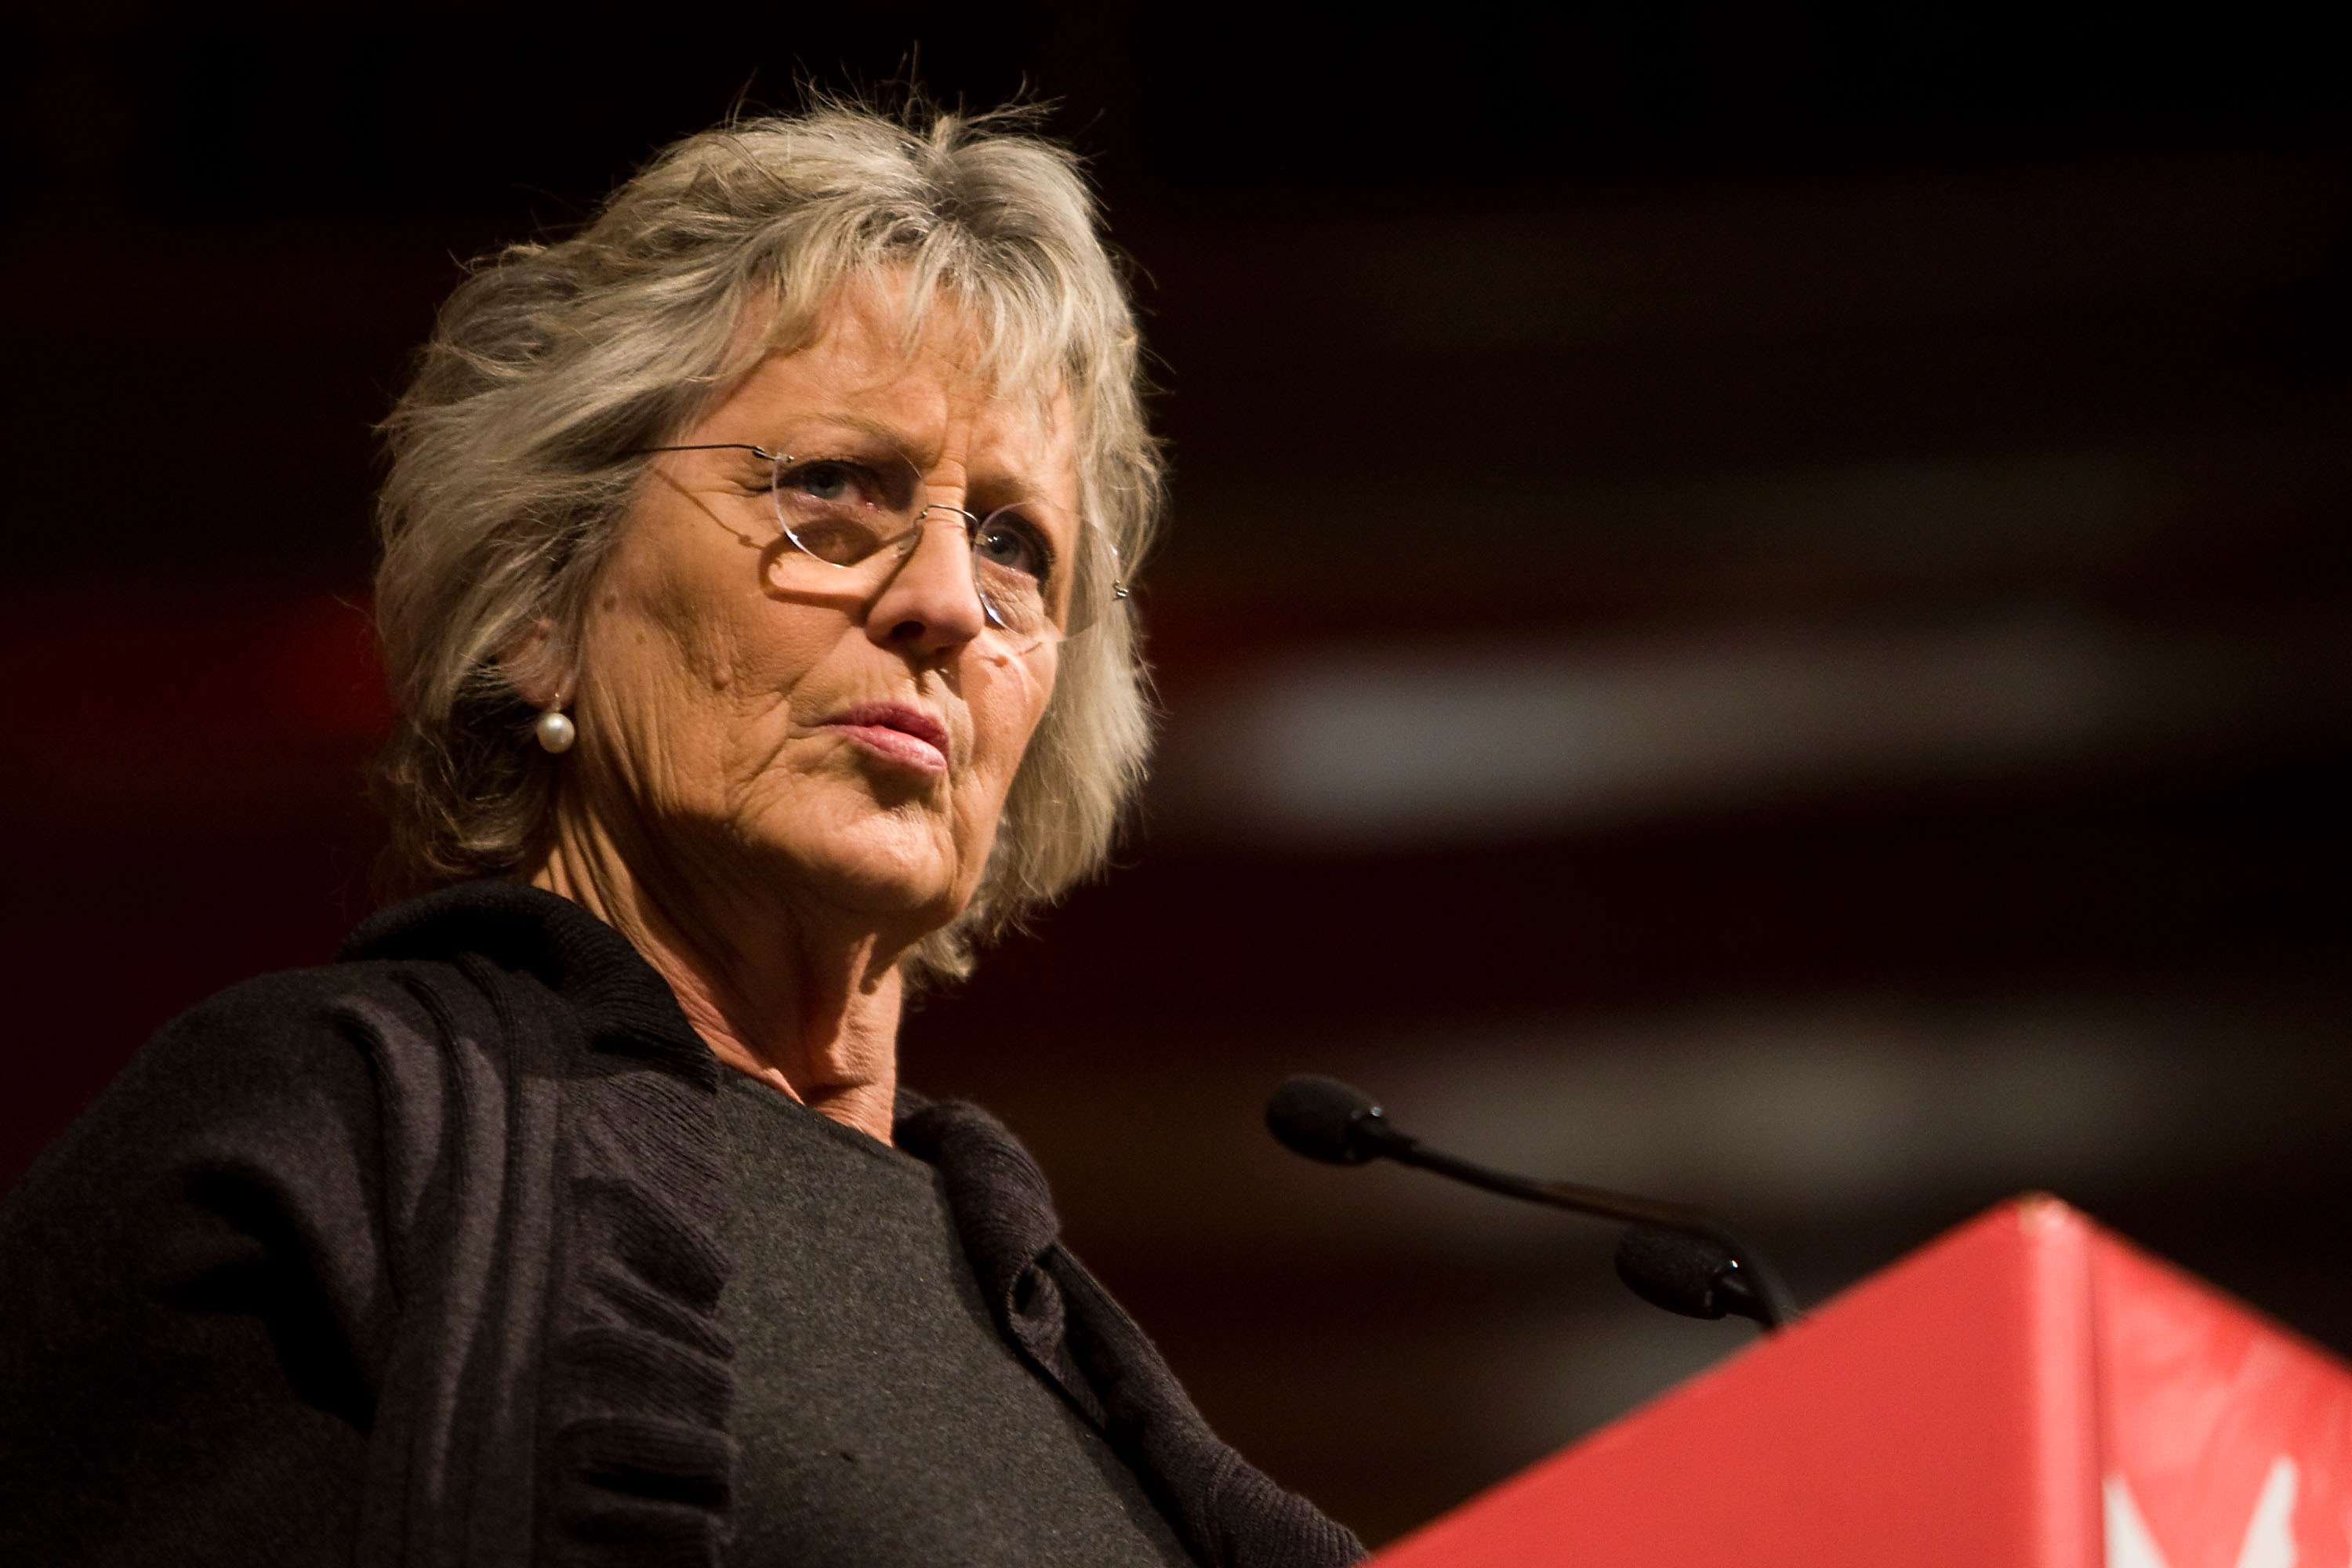 Germaine Greer speaks at The Age Book of the Year Awards as part of the opening night of the Melbourne Writers Festival on August 22, 2008 in Melbourne, Australia. (Kane Hibberd—Getty Images)